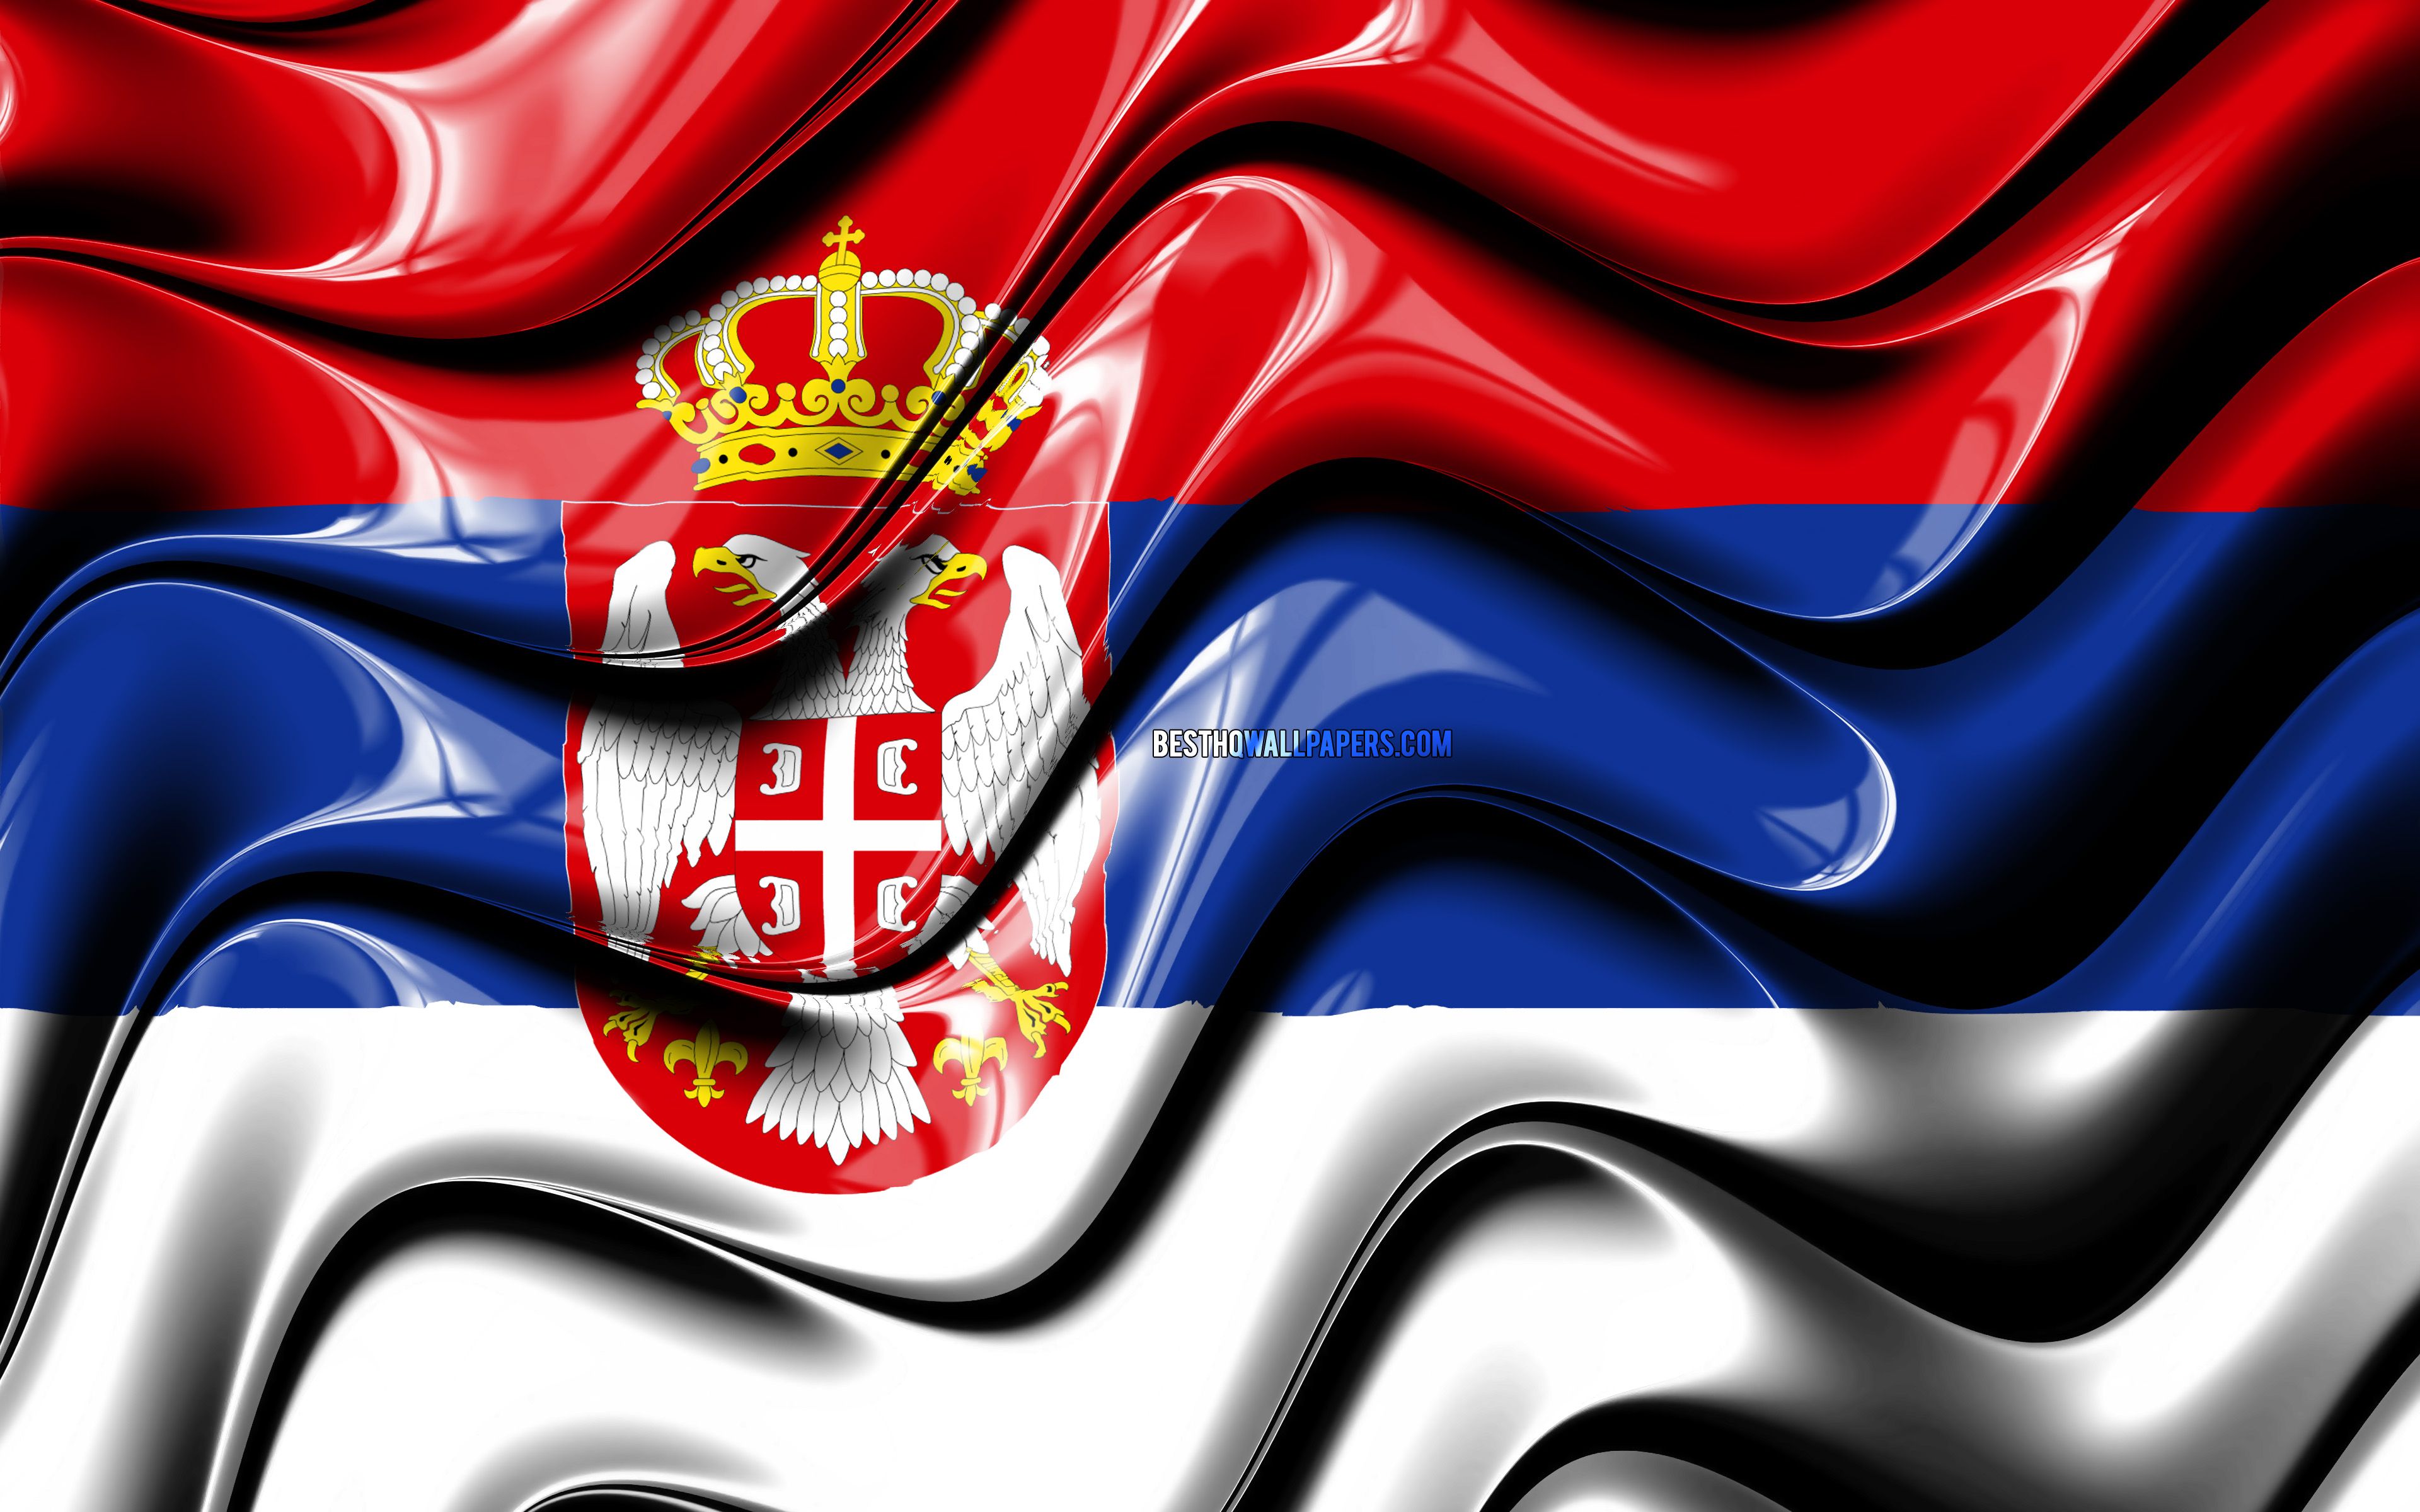 Download wallpaper Serbian flag, 4k, Europe, national symbols, Flag of Serbia, 3D art, Serbia, European countries, Serbia 3D flag for desktop with resolution 3840x2400. High Quality HD picture wallpaper